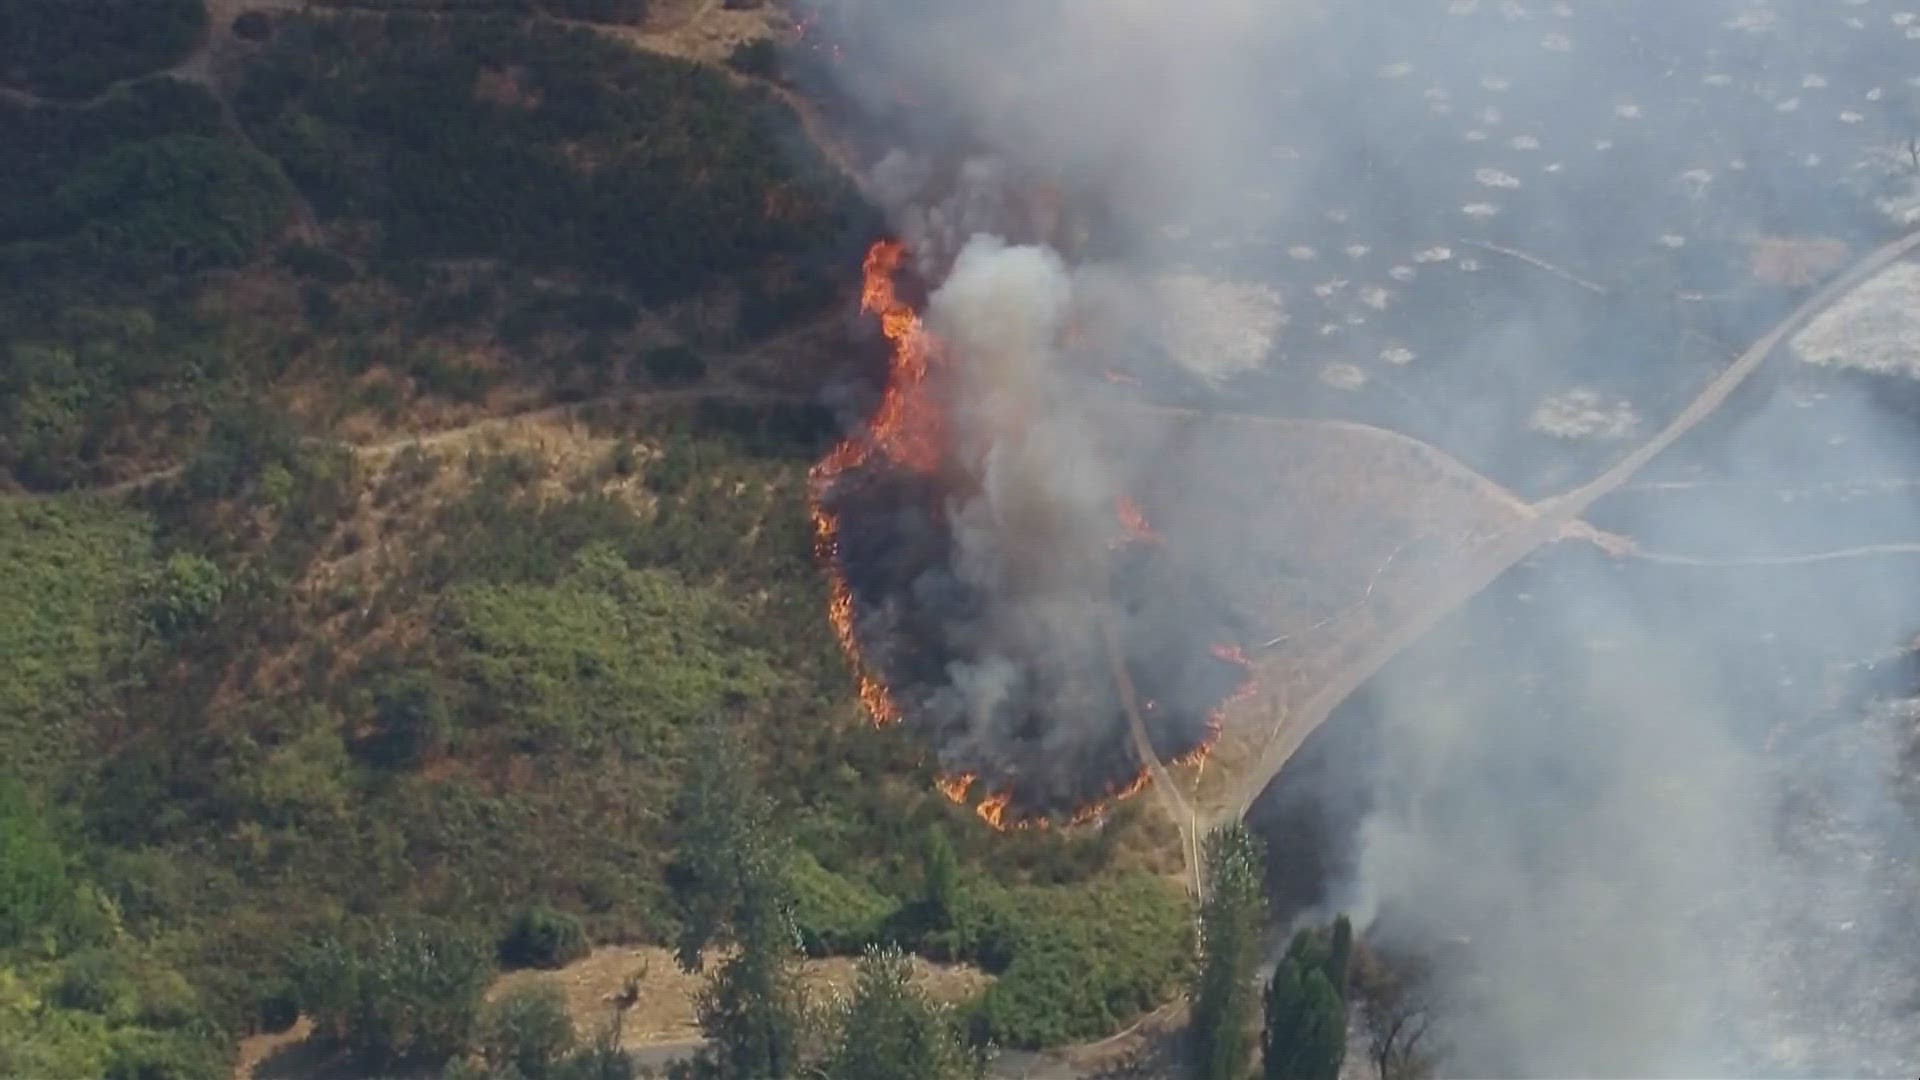 The fire came close to trees and homes, prompting officials to evacuate some residents.